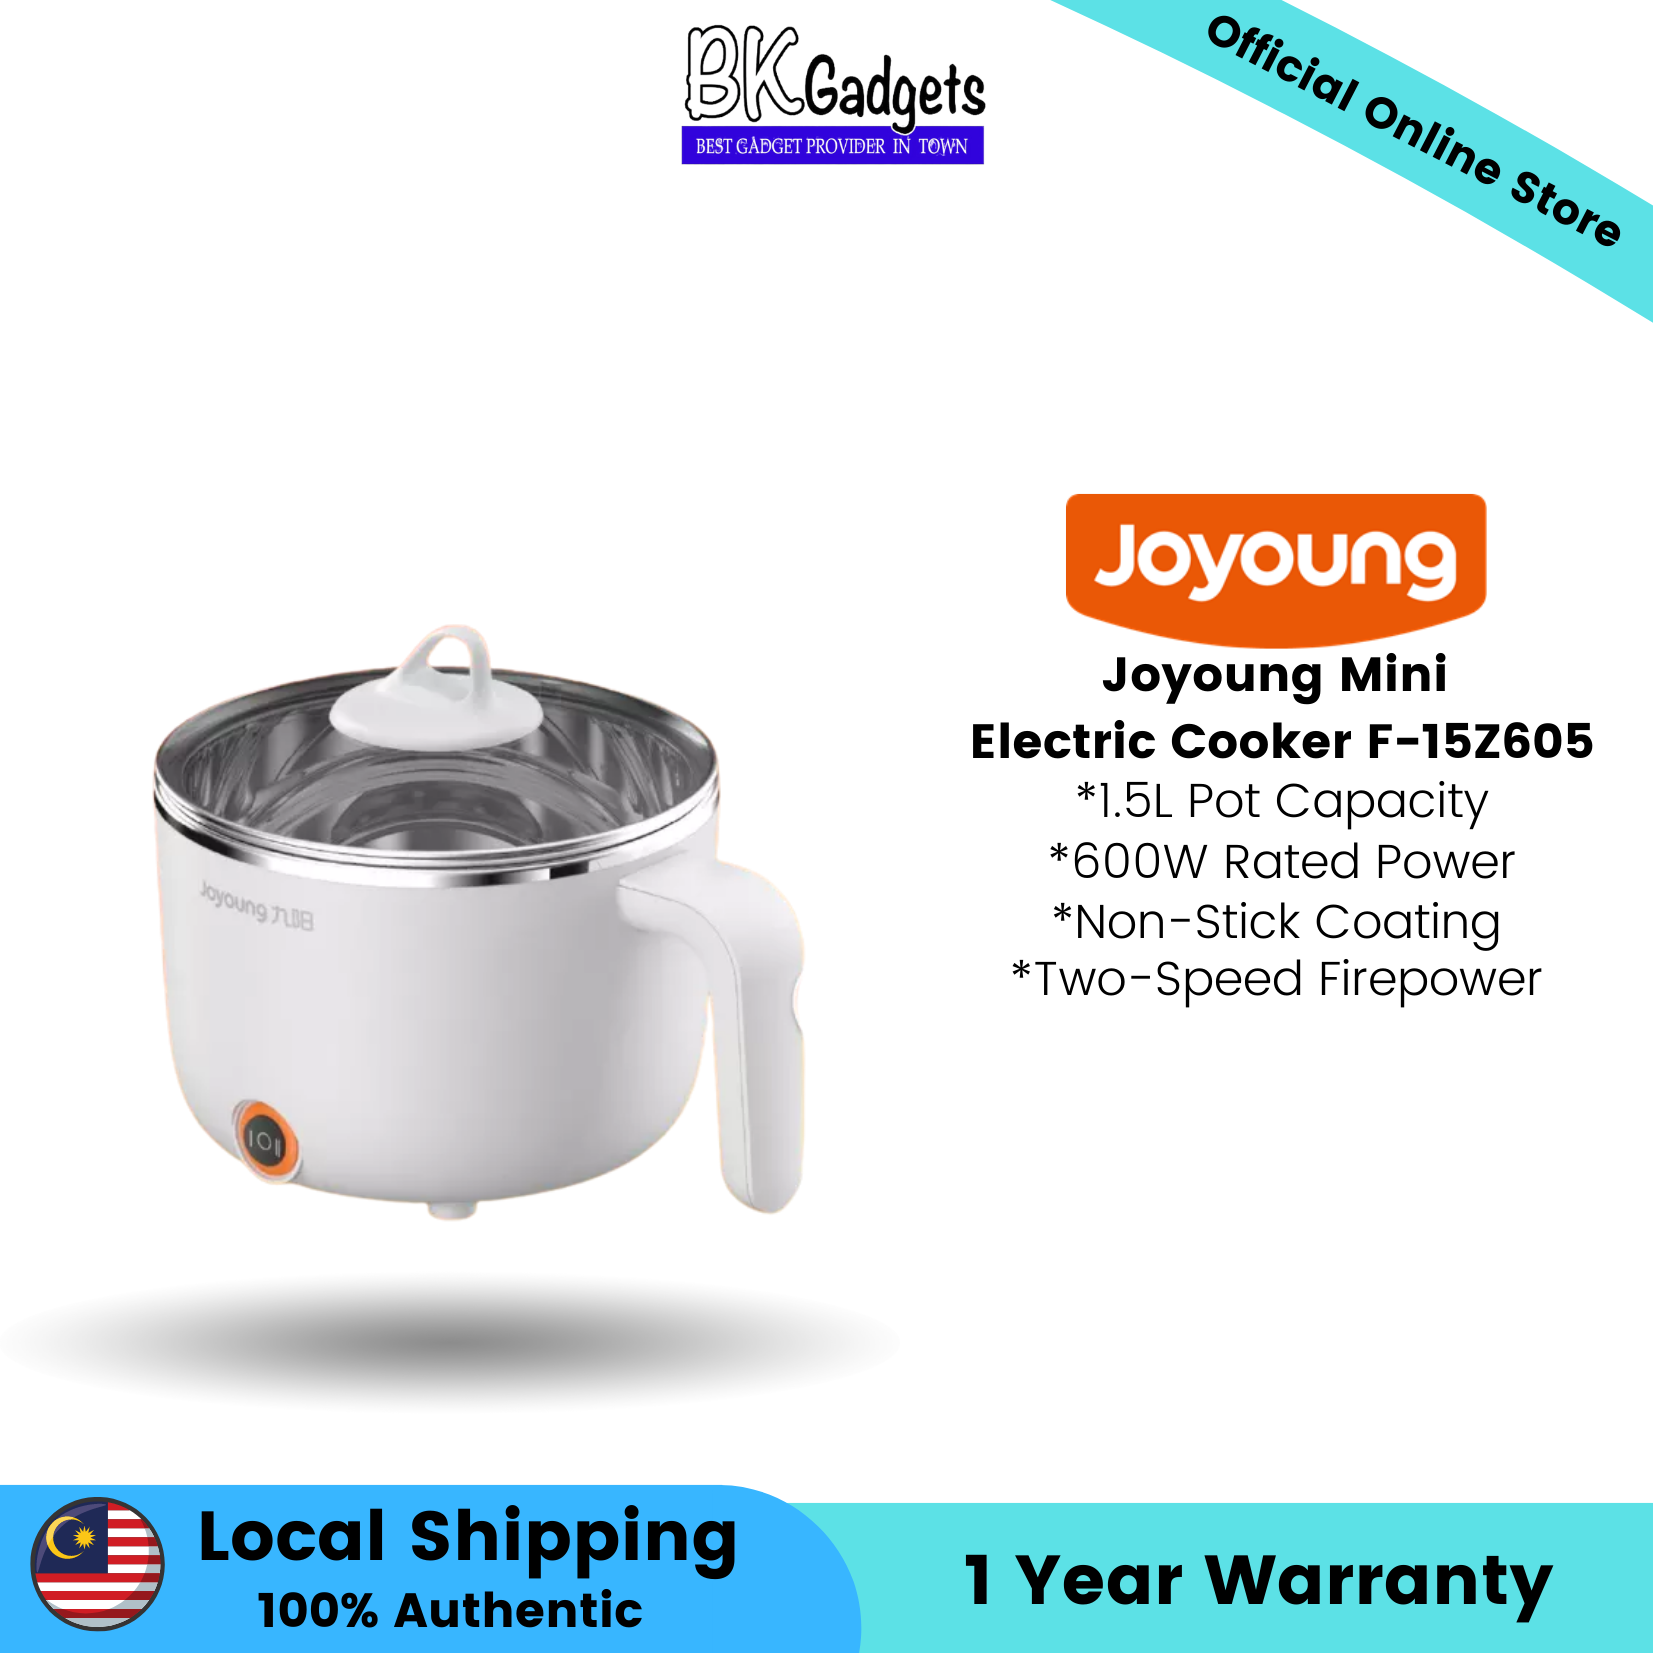 Joyoung Mini Electric Cooker F-15Z605 - 1.5L Pot Capacity | 600W Rated Power | Non-Stick Coating